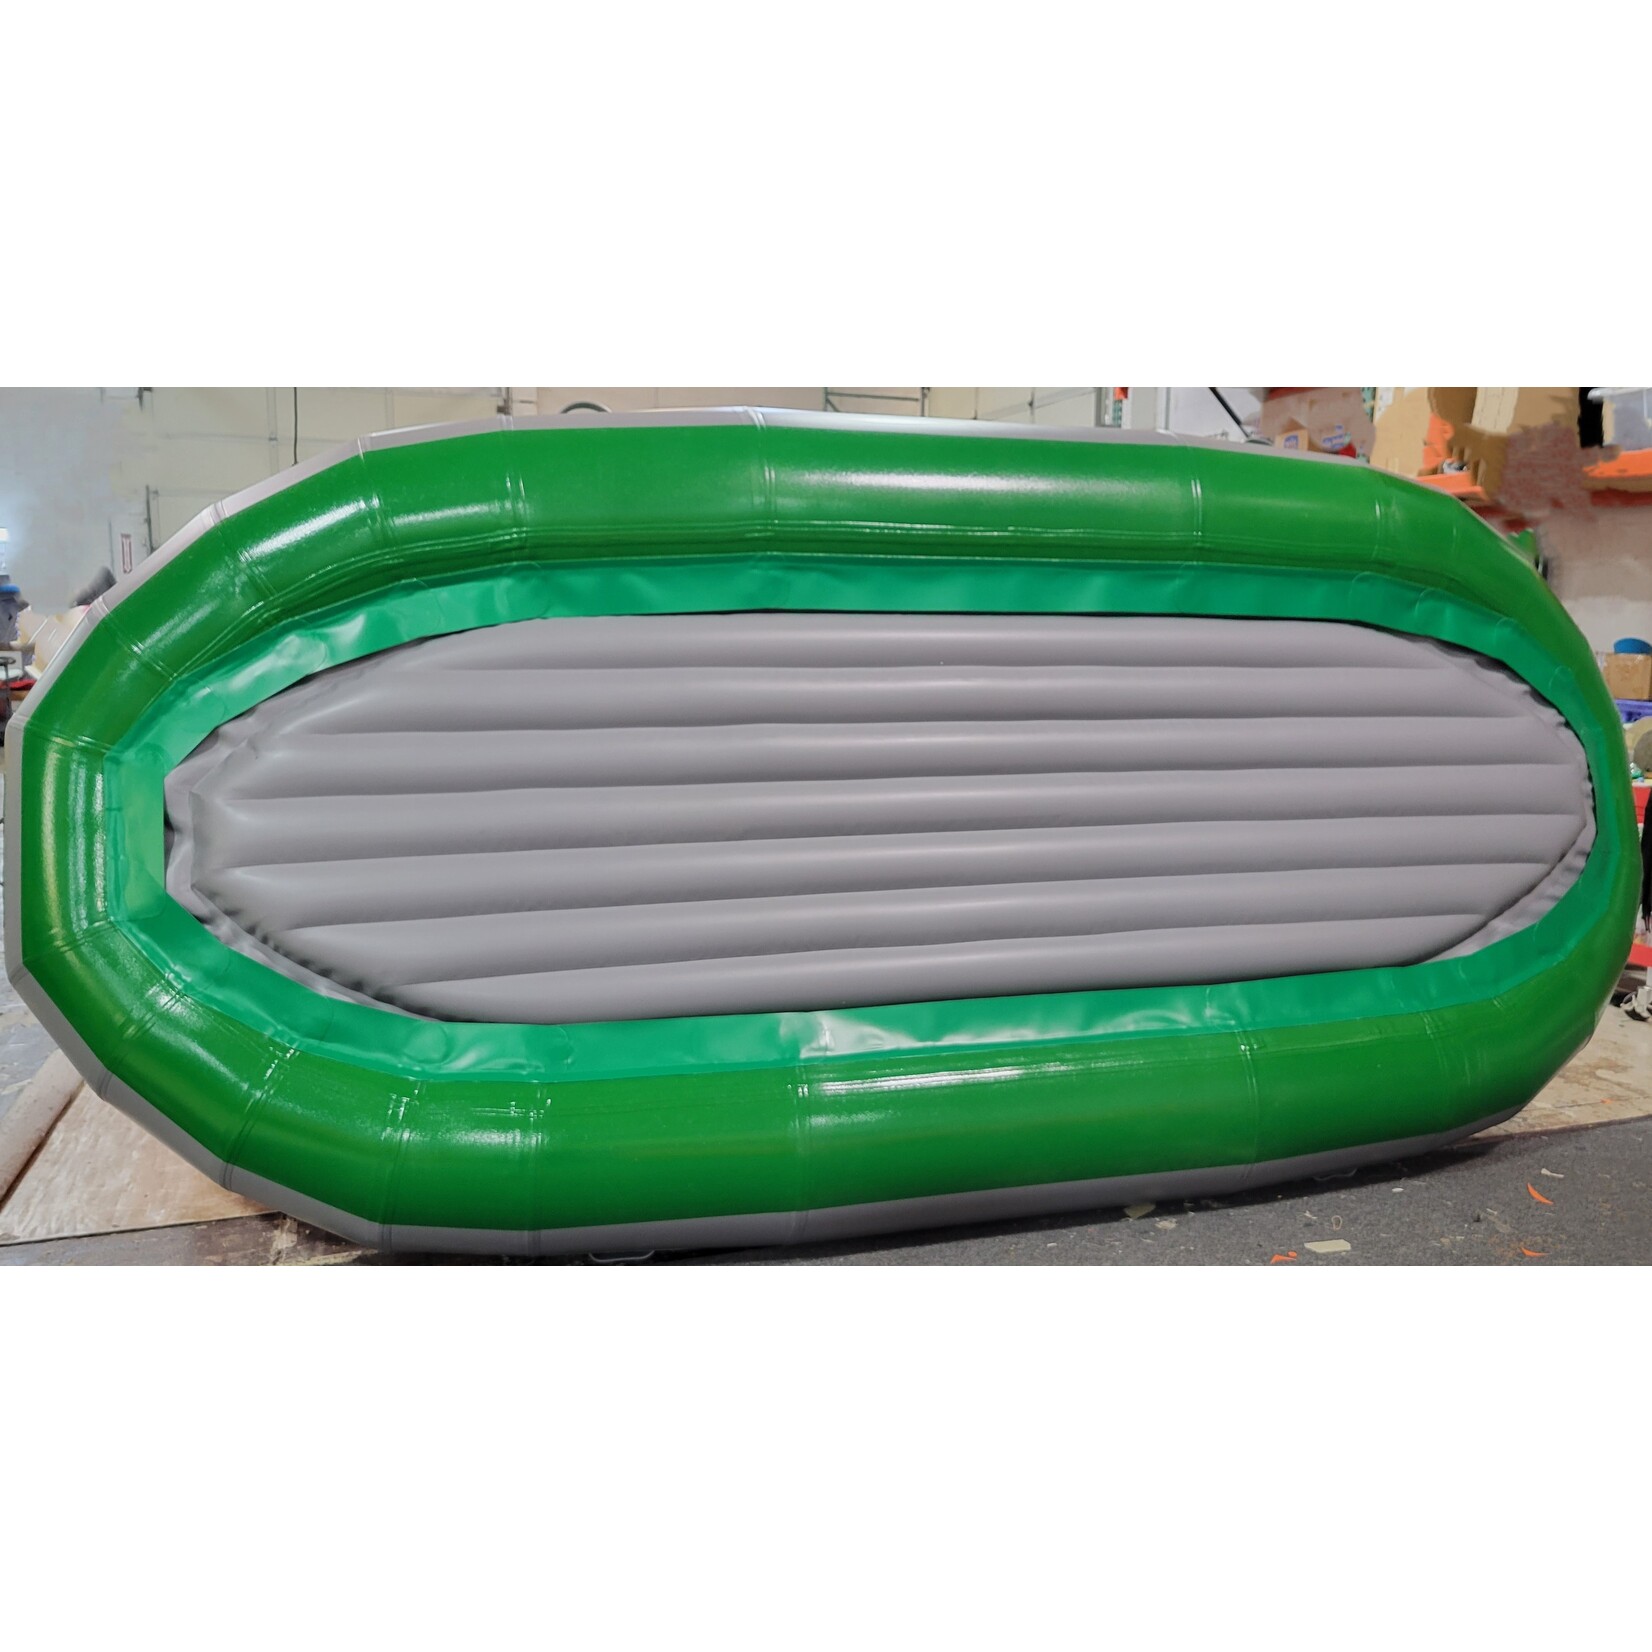 SOTAR Custom Whitewater Rafts, Catarafts, Inflatable Kayaks and more